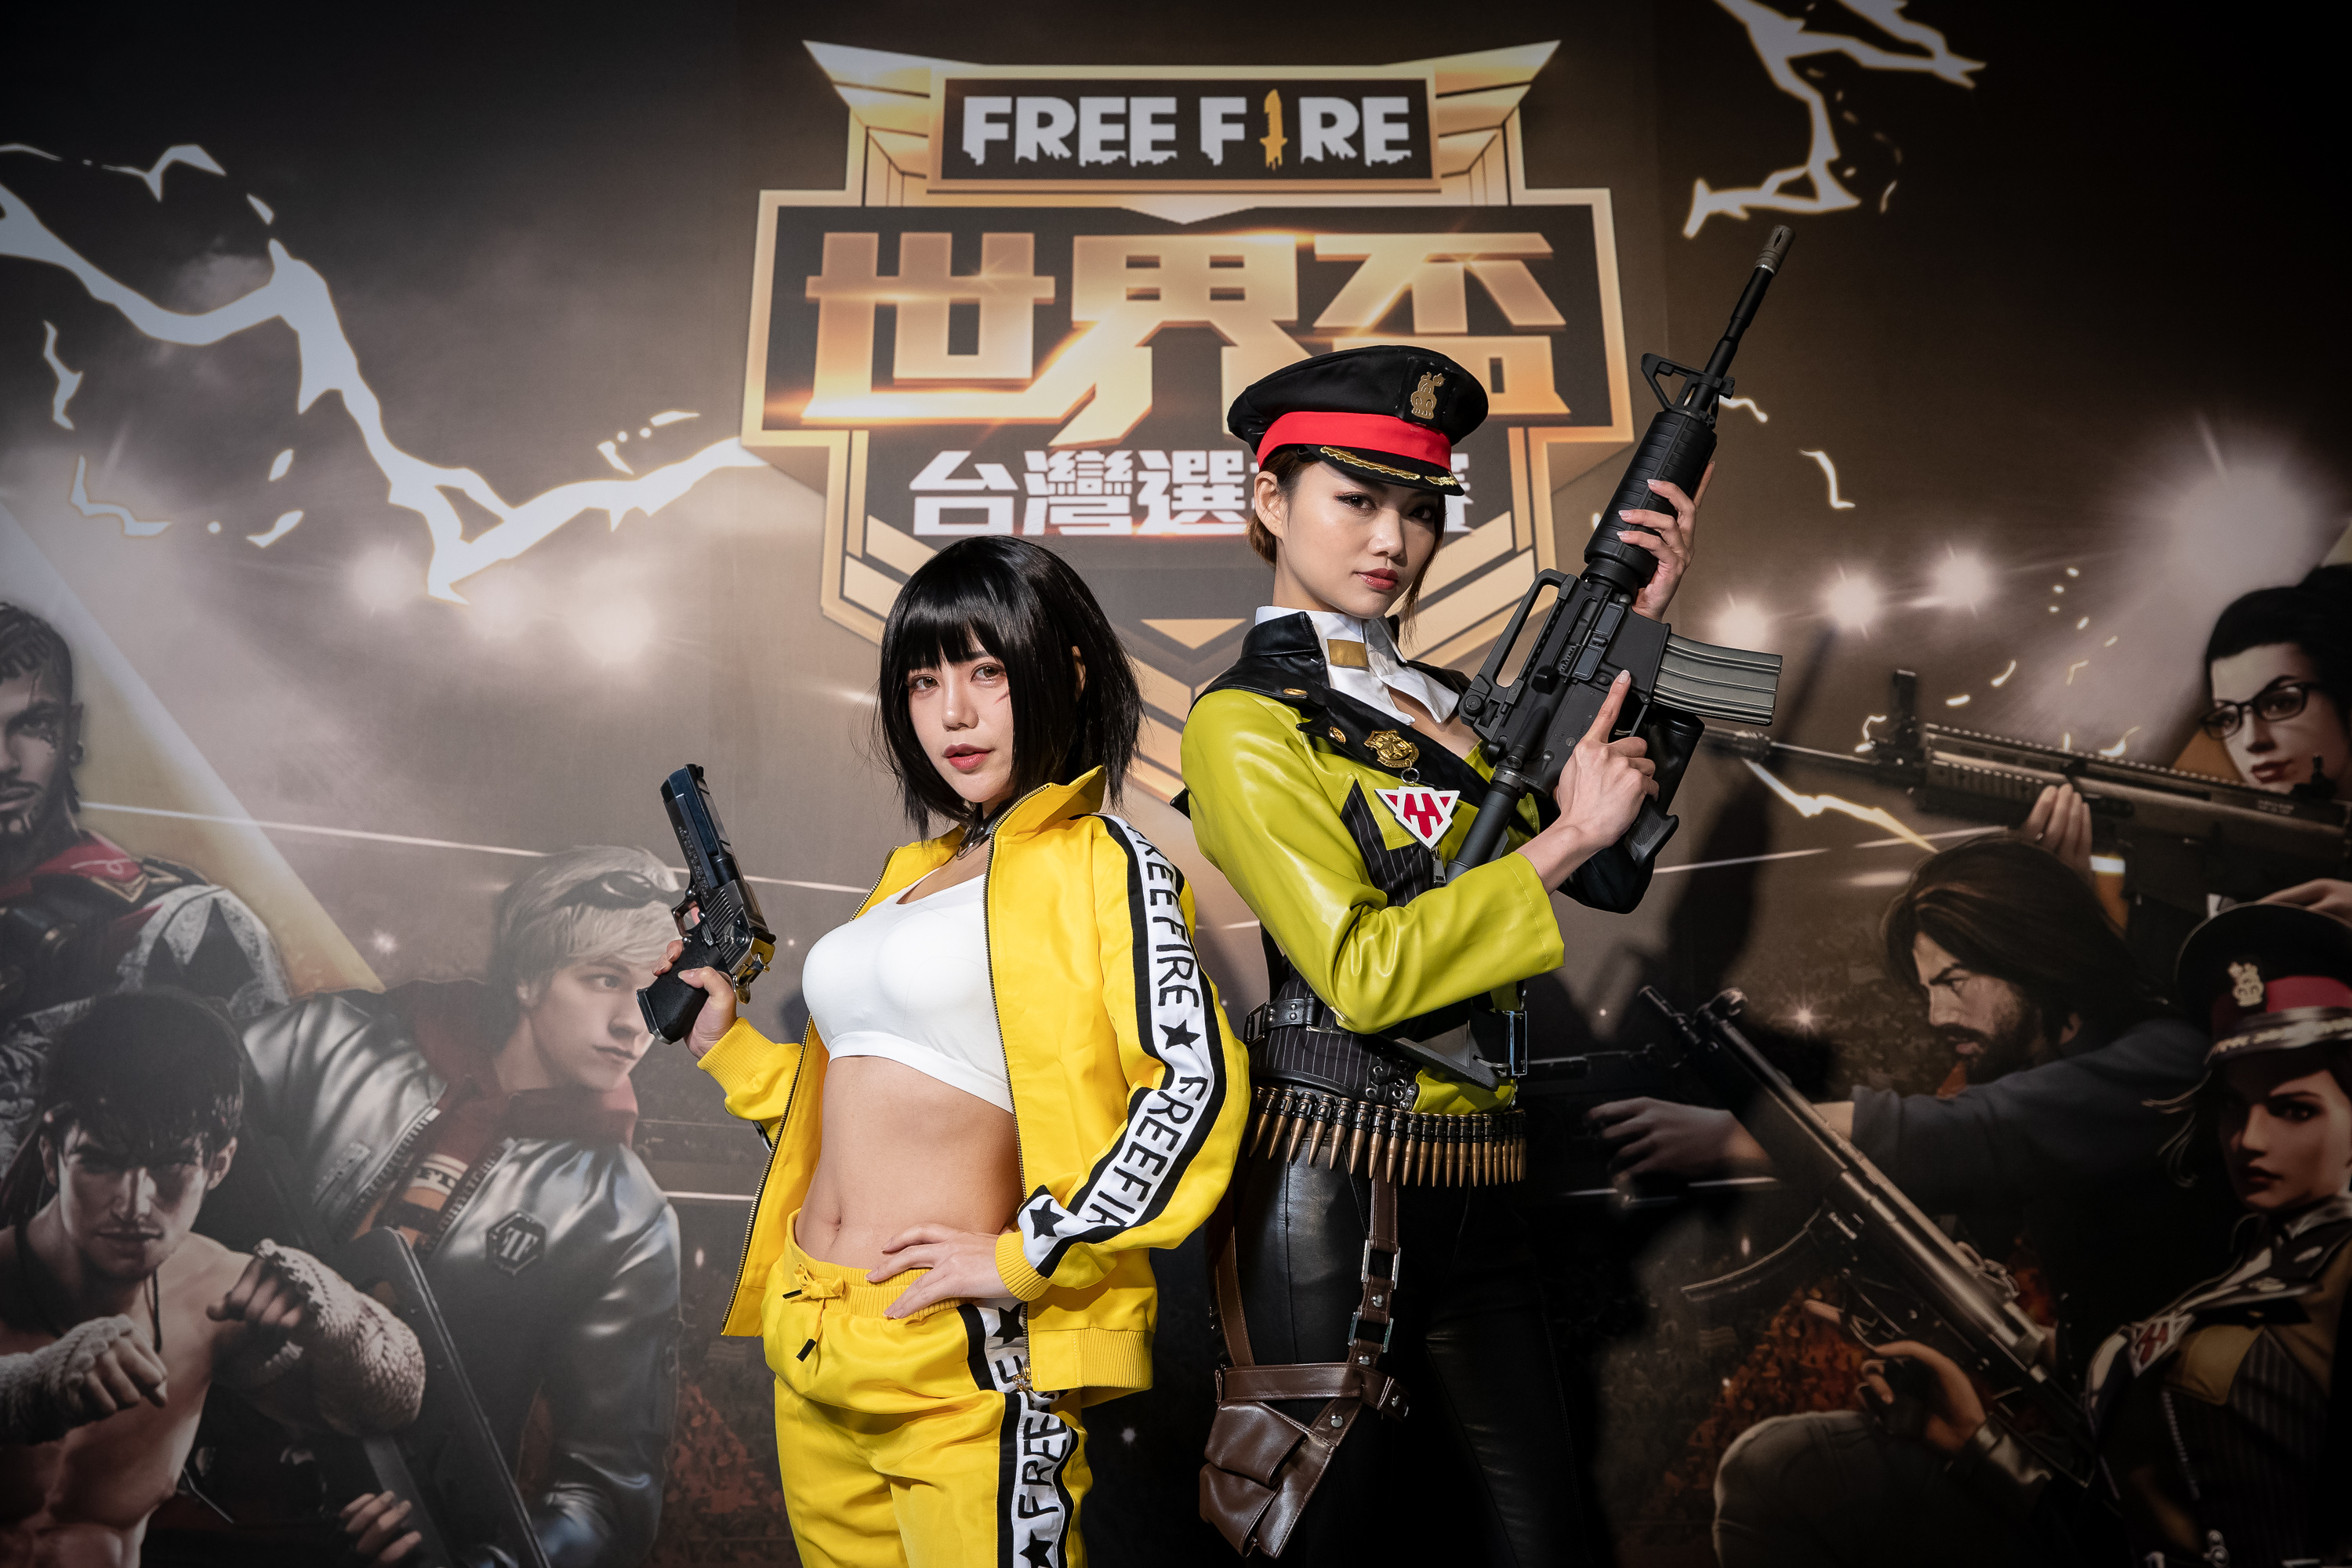 Cool Garena Free Fire Wallpapers